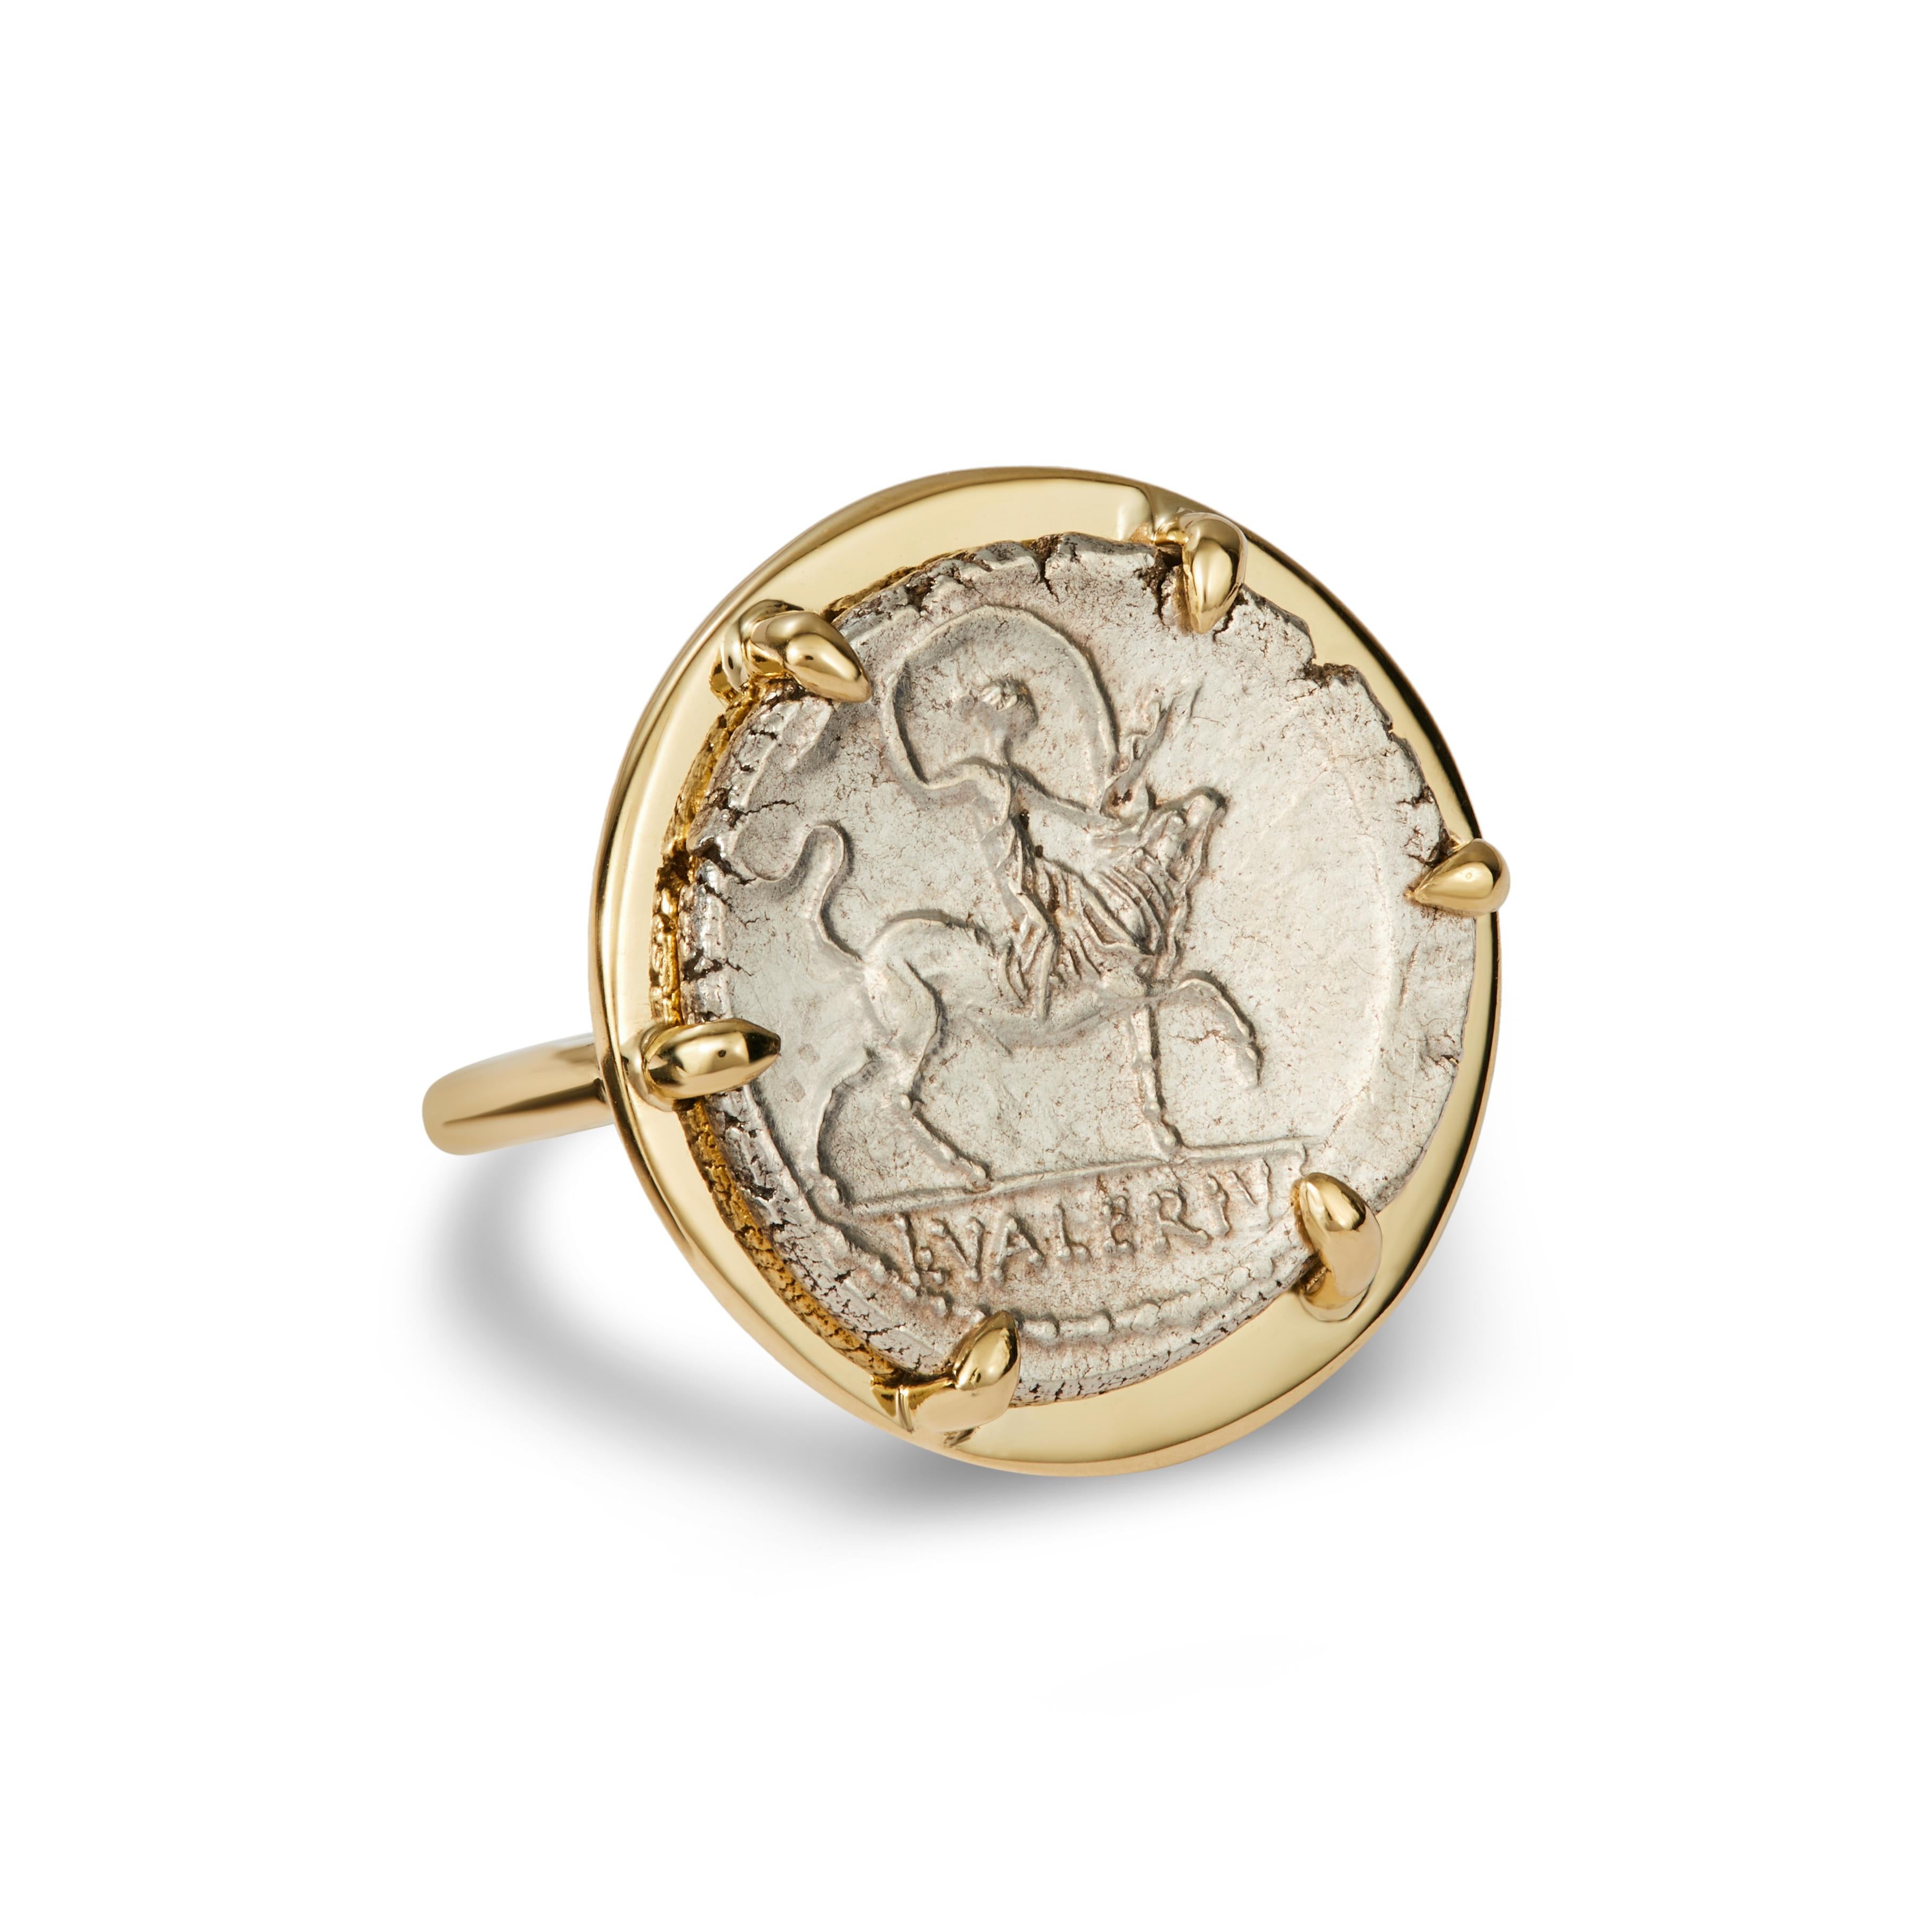 This DUBINI coin ring from the 'Empires' collection features an authentic silver coin dating 45 B.C. set in 18K yellow gold.

DEPICTED ON THE COIN

Obverse: Europa riding bull right, holding her veil which billows out above; L·VALERIV[S].

Reverse: